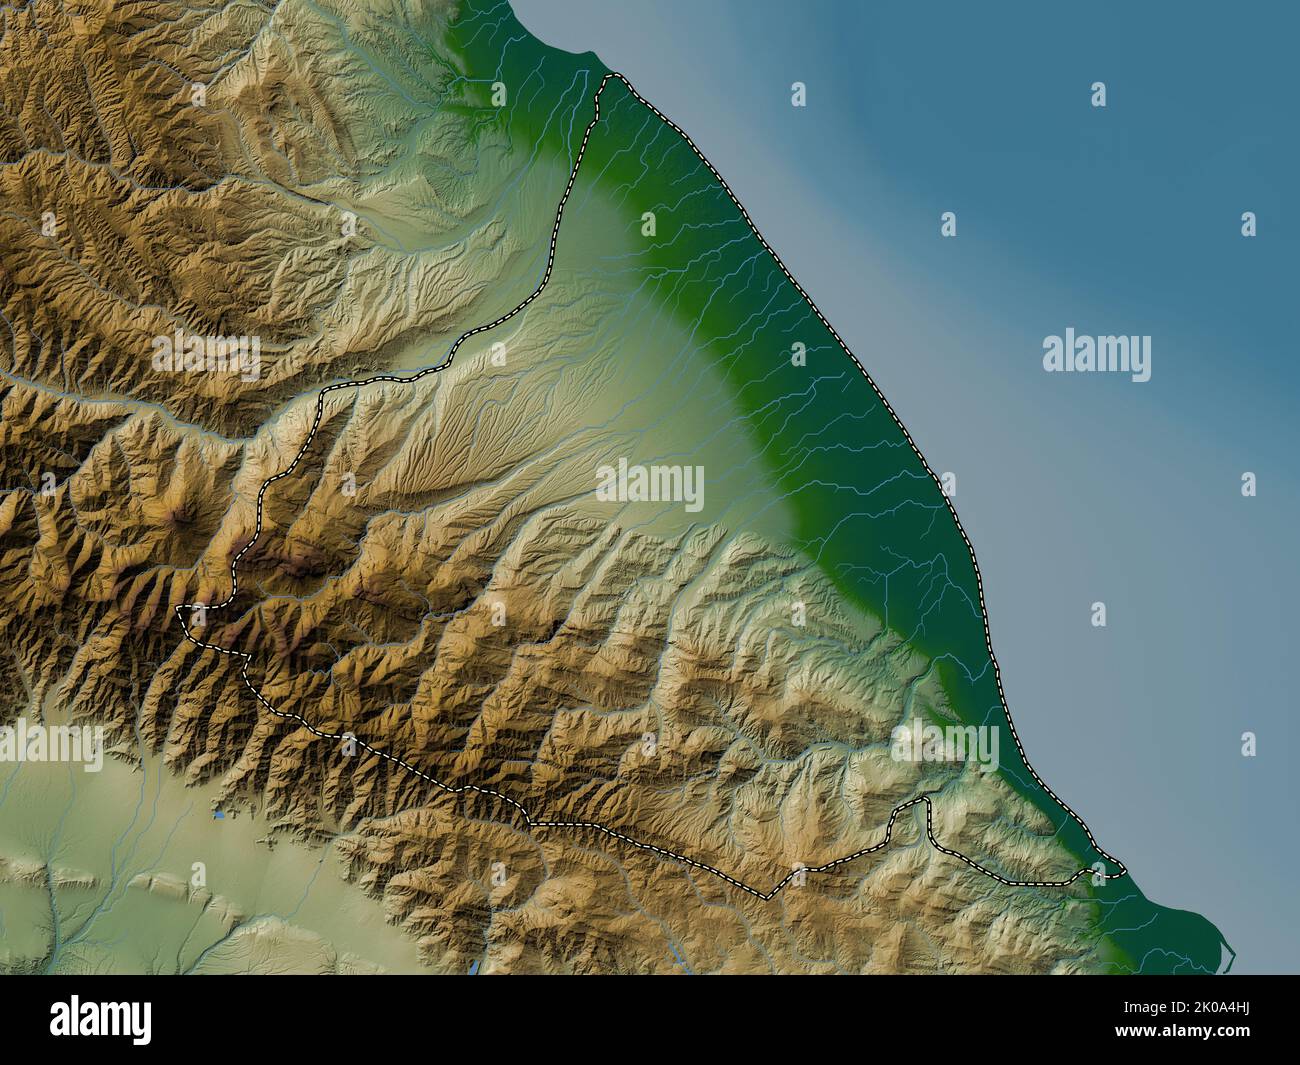 Quba-Khachmaz, region of Azerbaijan. Colored elevation map with lakes and rivers Stock Photo